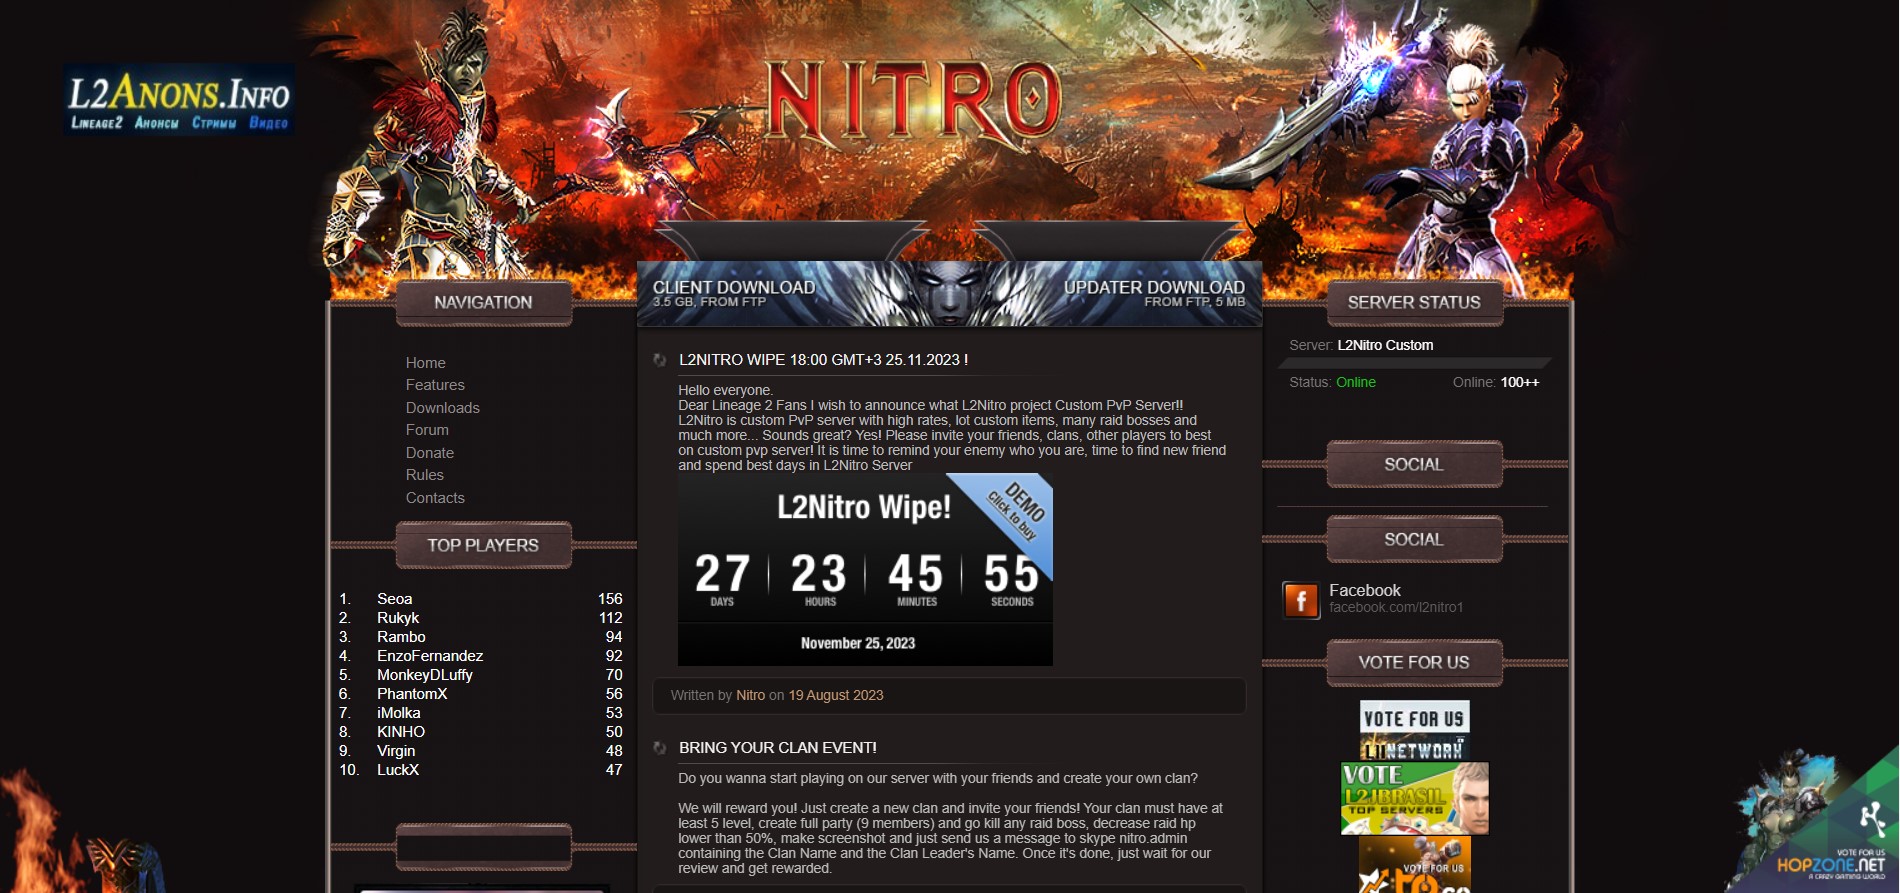 ⚡ L2Nitro - Explosive Interlude World with x6000 Rates! Join the Epic Adventure! ⚡